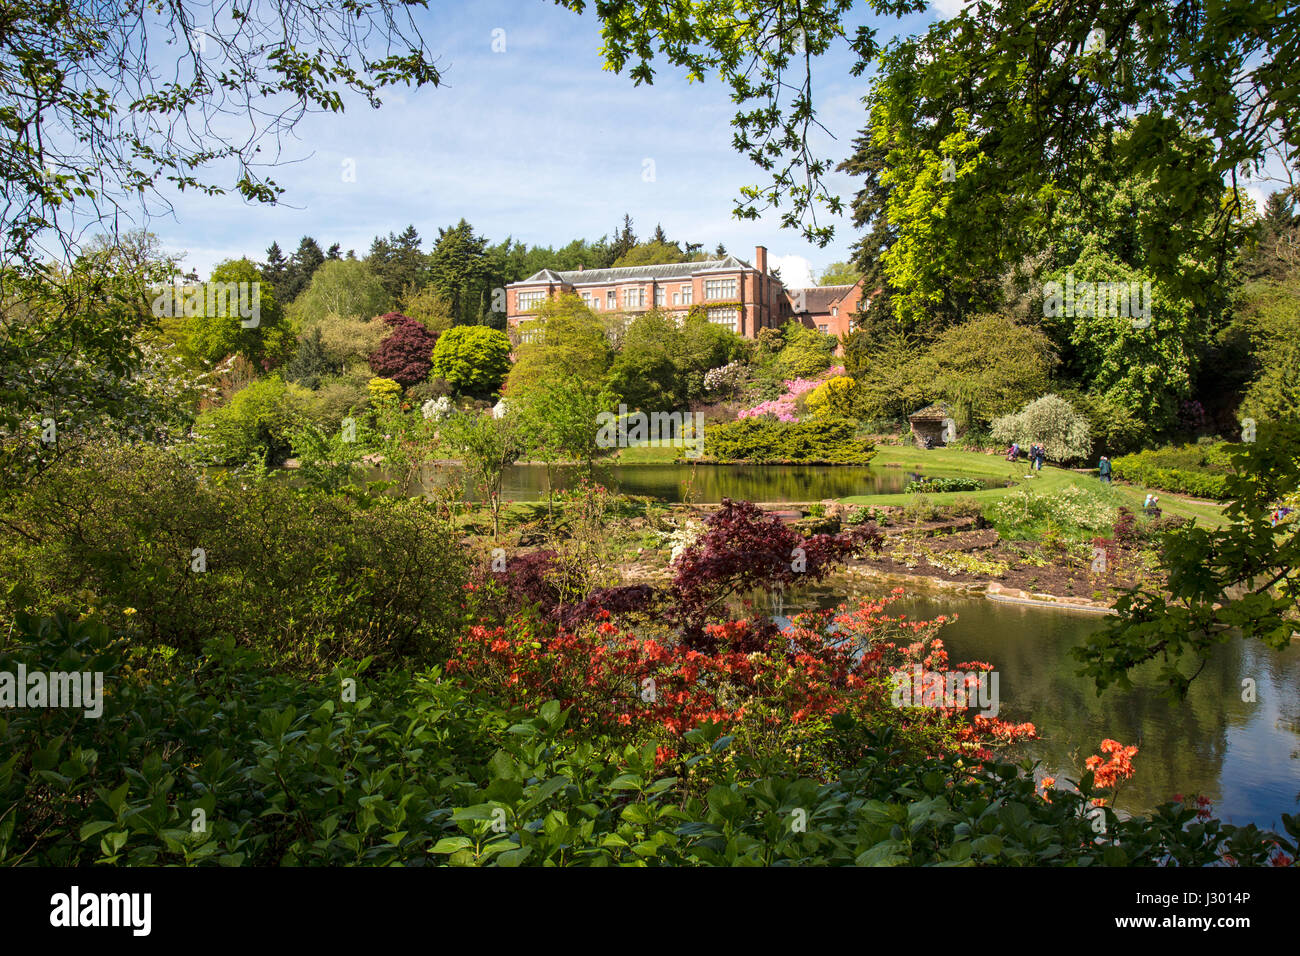 Hodnet Hall in Shropshire, England. View looking over the ornamental garden, noted for its gardens, created in 1922. Stock Photo